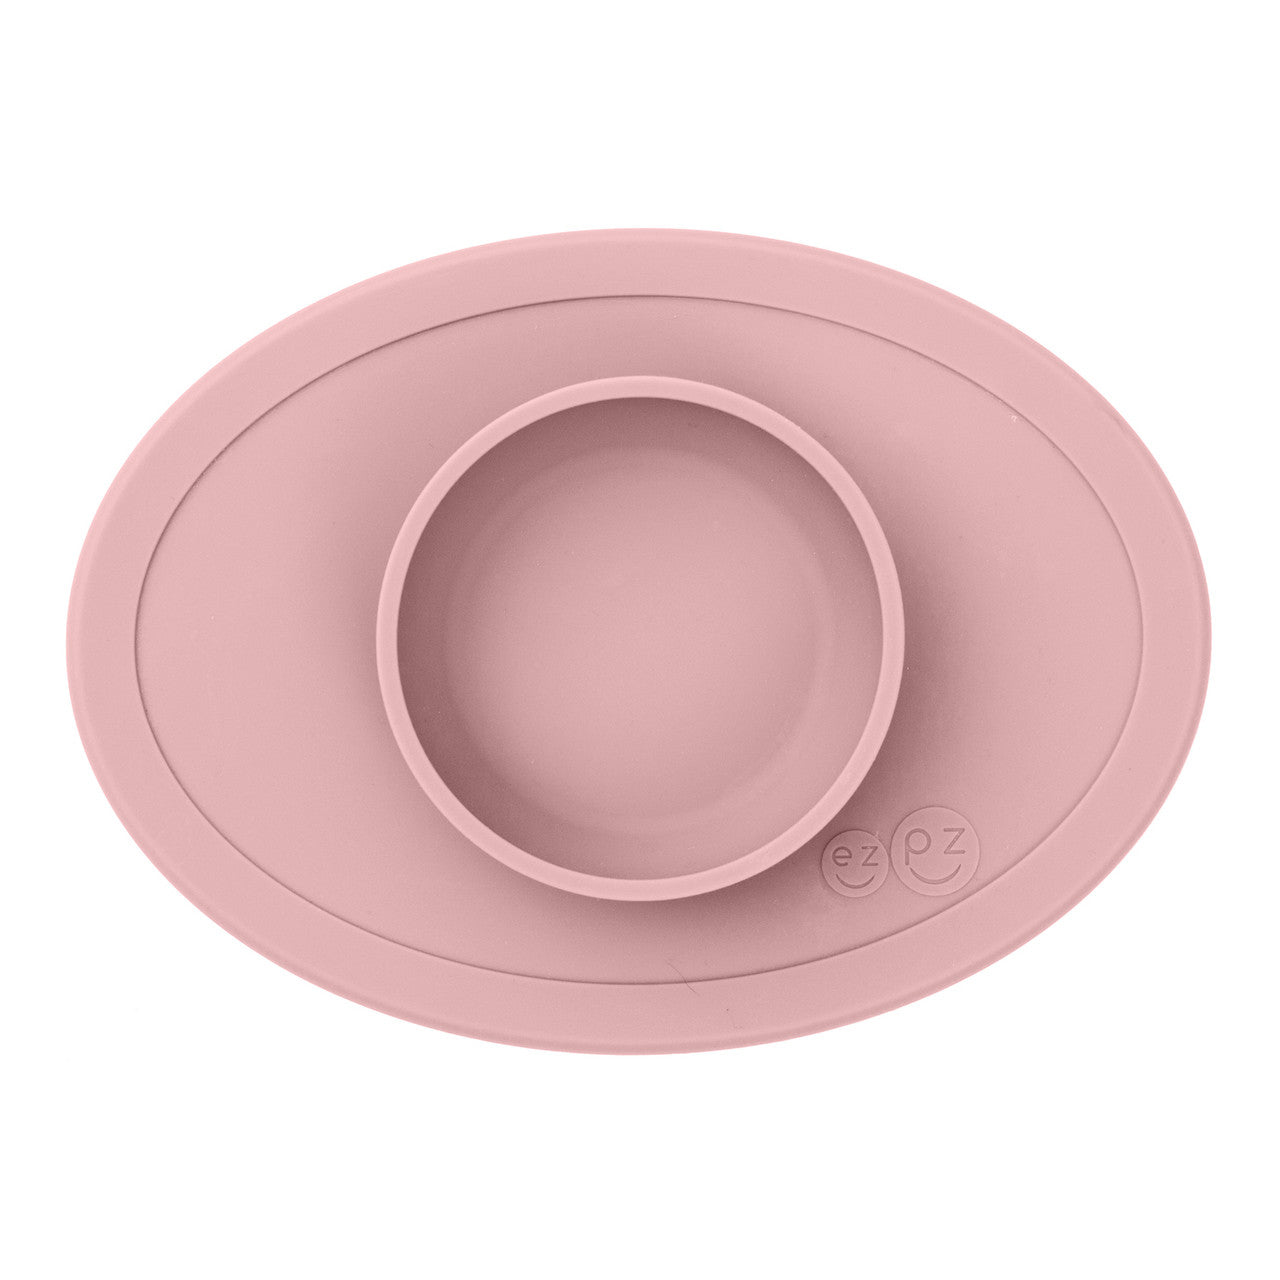 ezpz Tiny Bowl - 100% Silicone Suction Bowl with Built